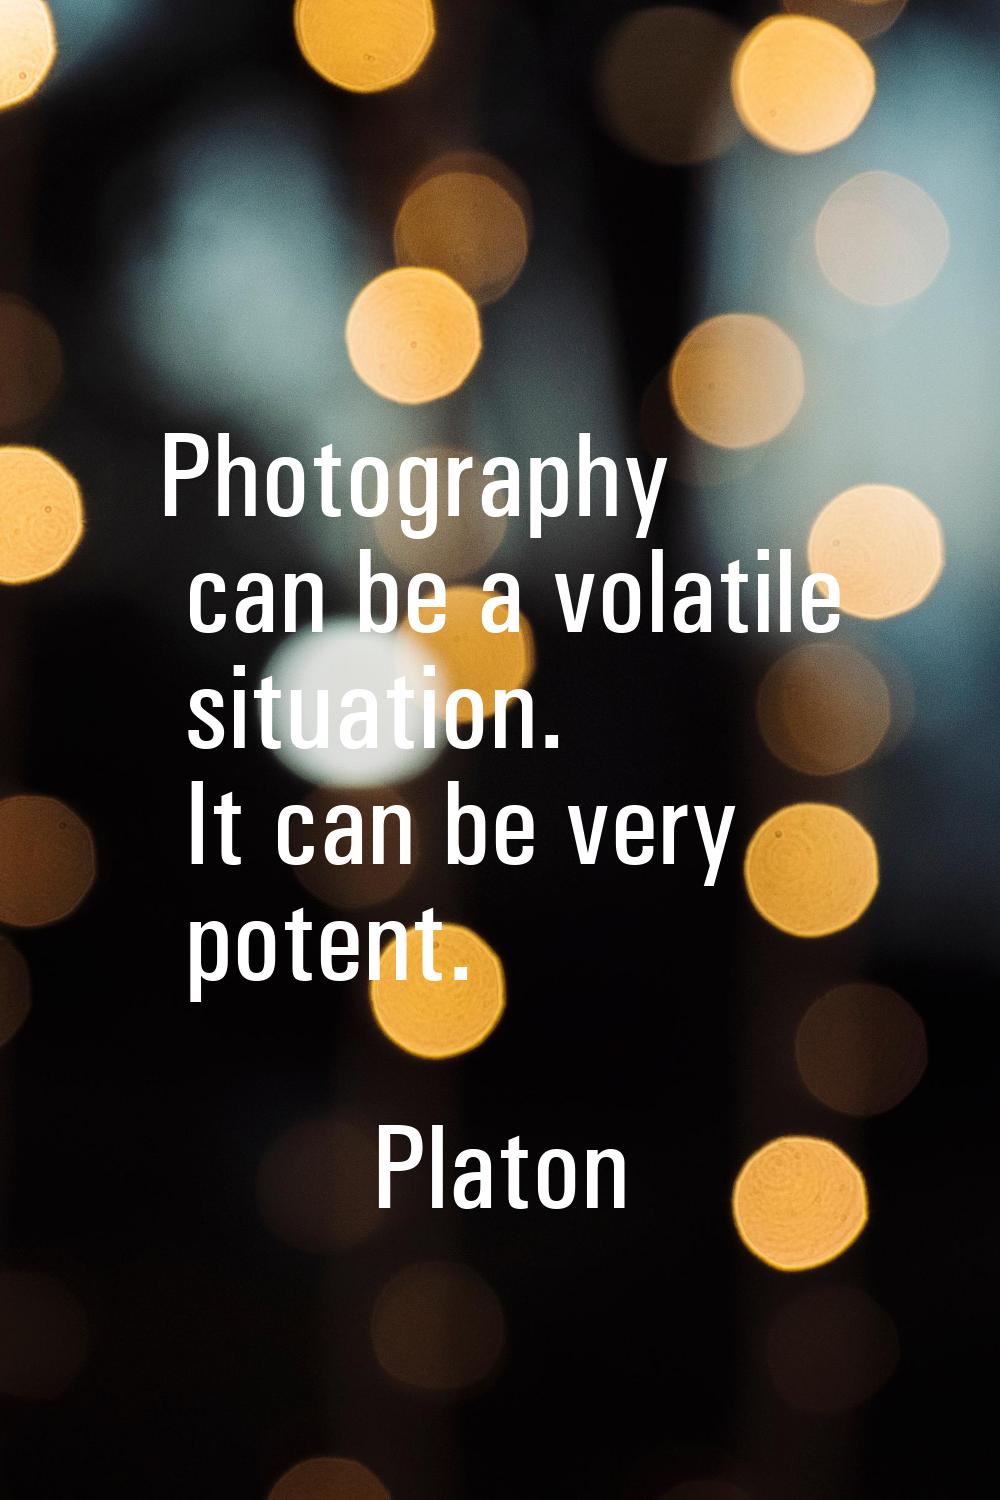 Photography can be a volatile situation. It can be very potent.